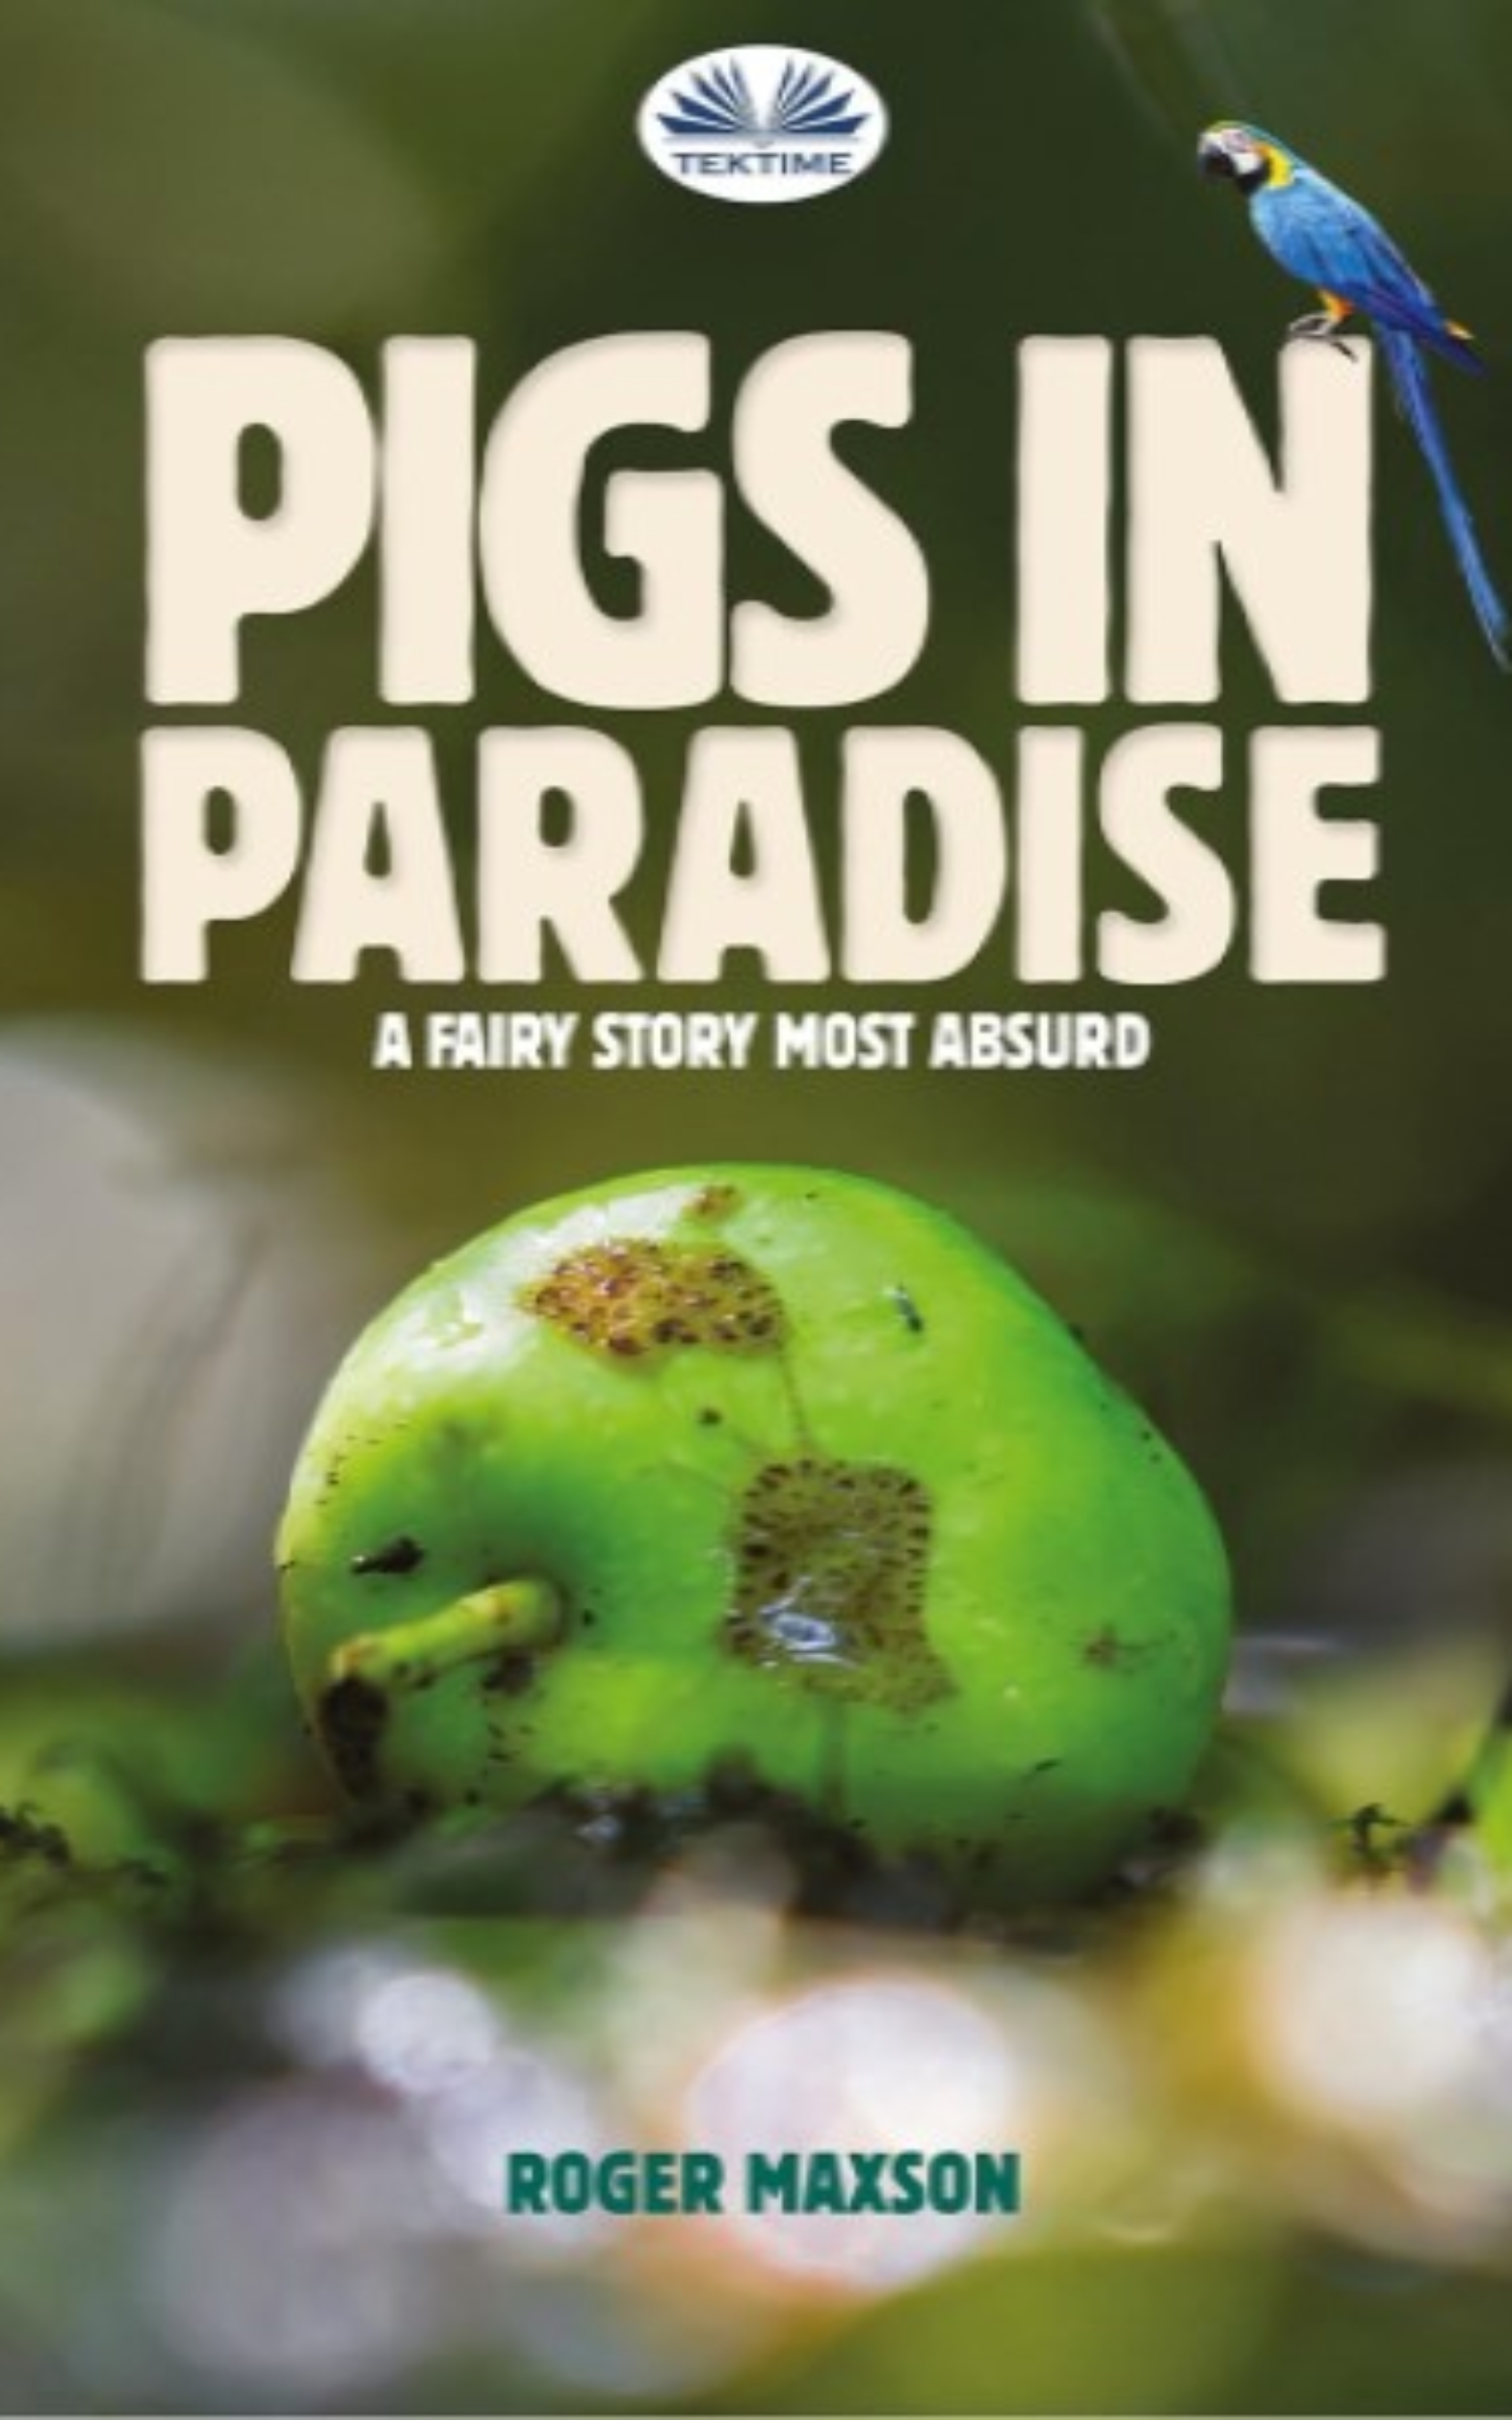 Pigs in Paradise